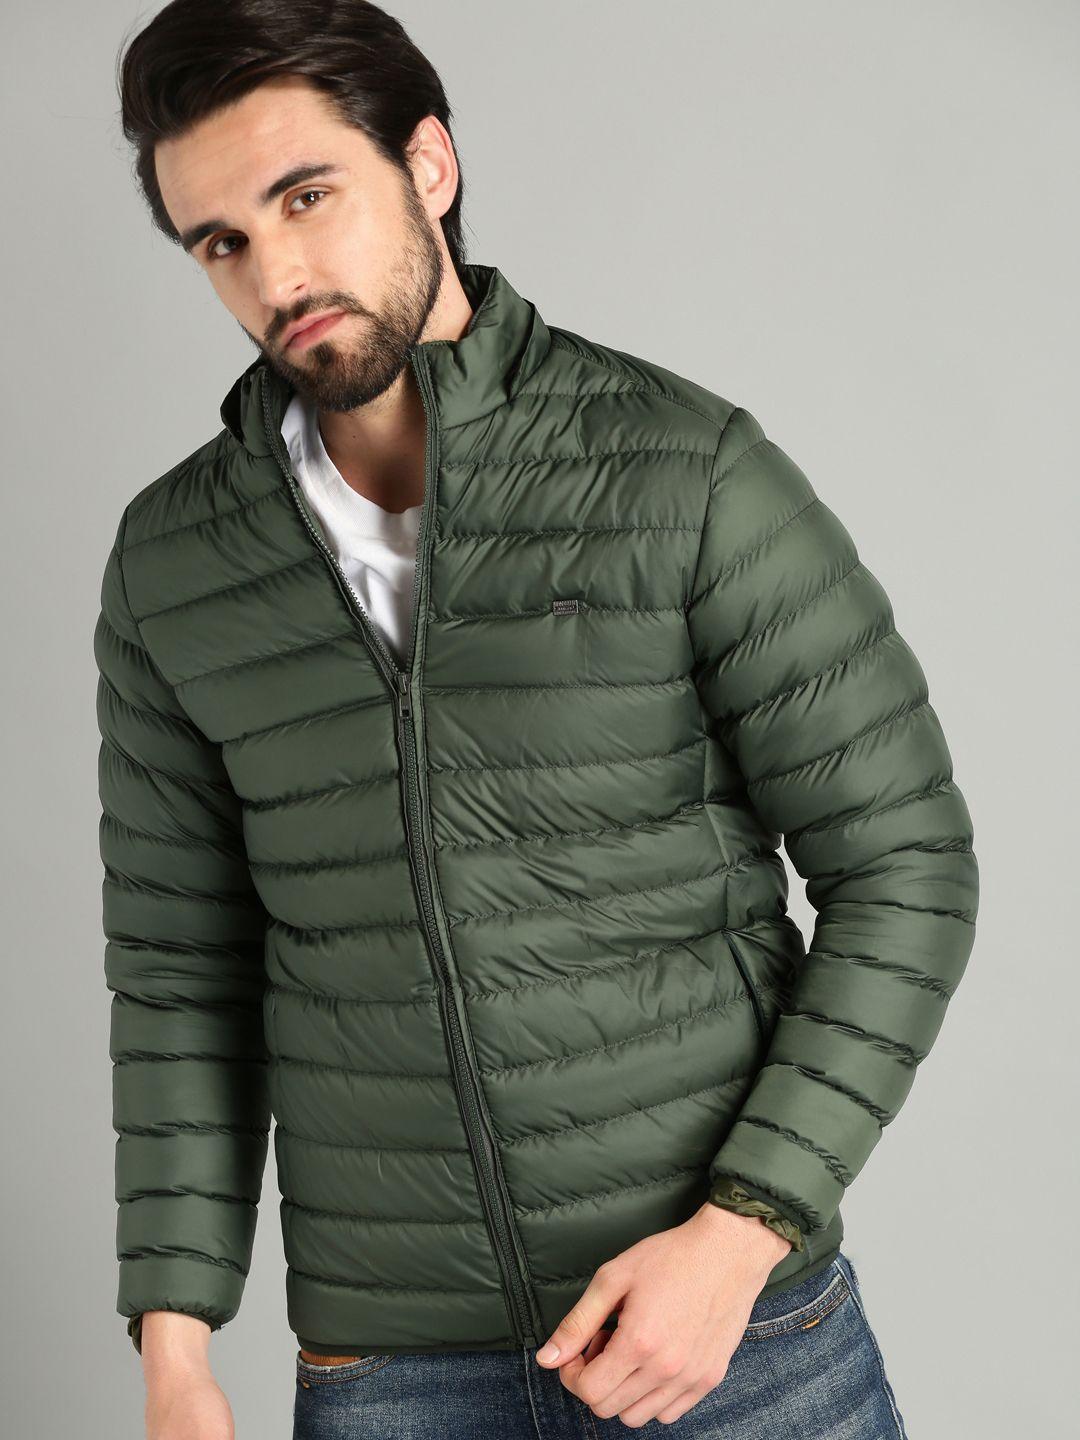 the roadster lifestyle co men green solid puffer jacket